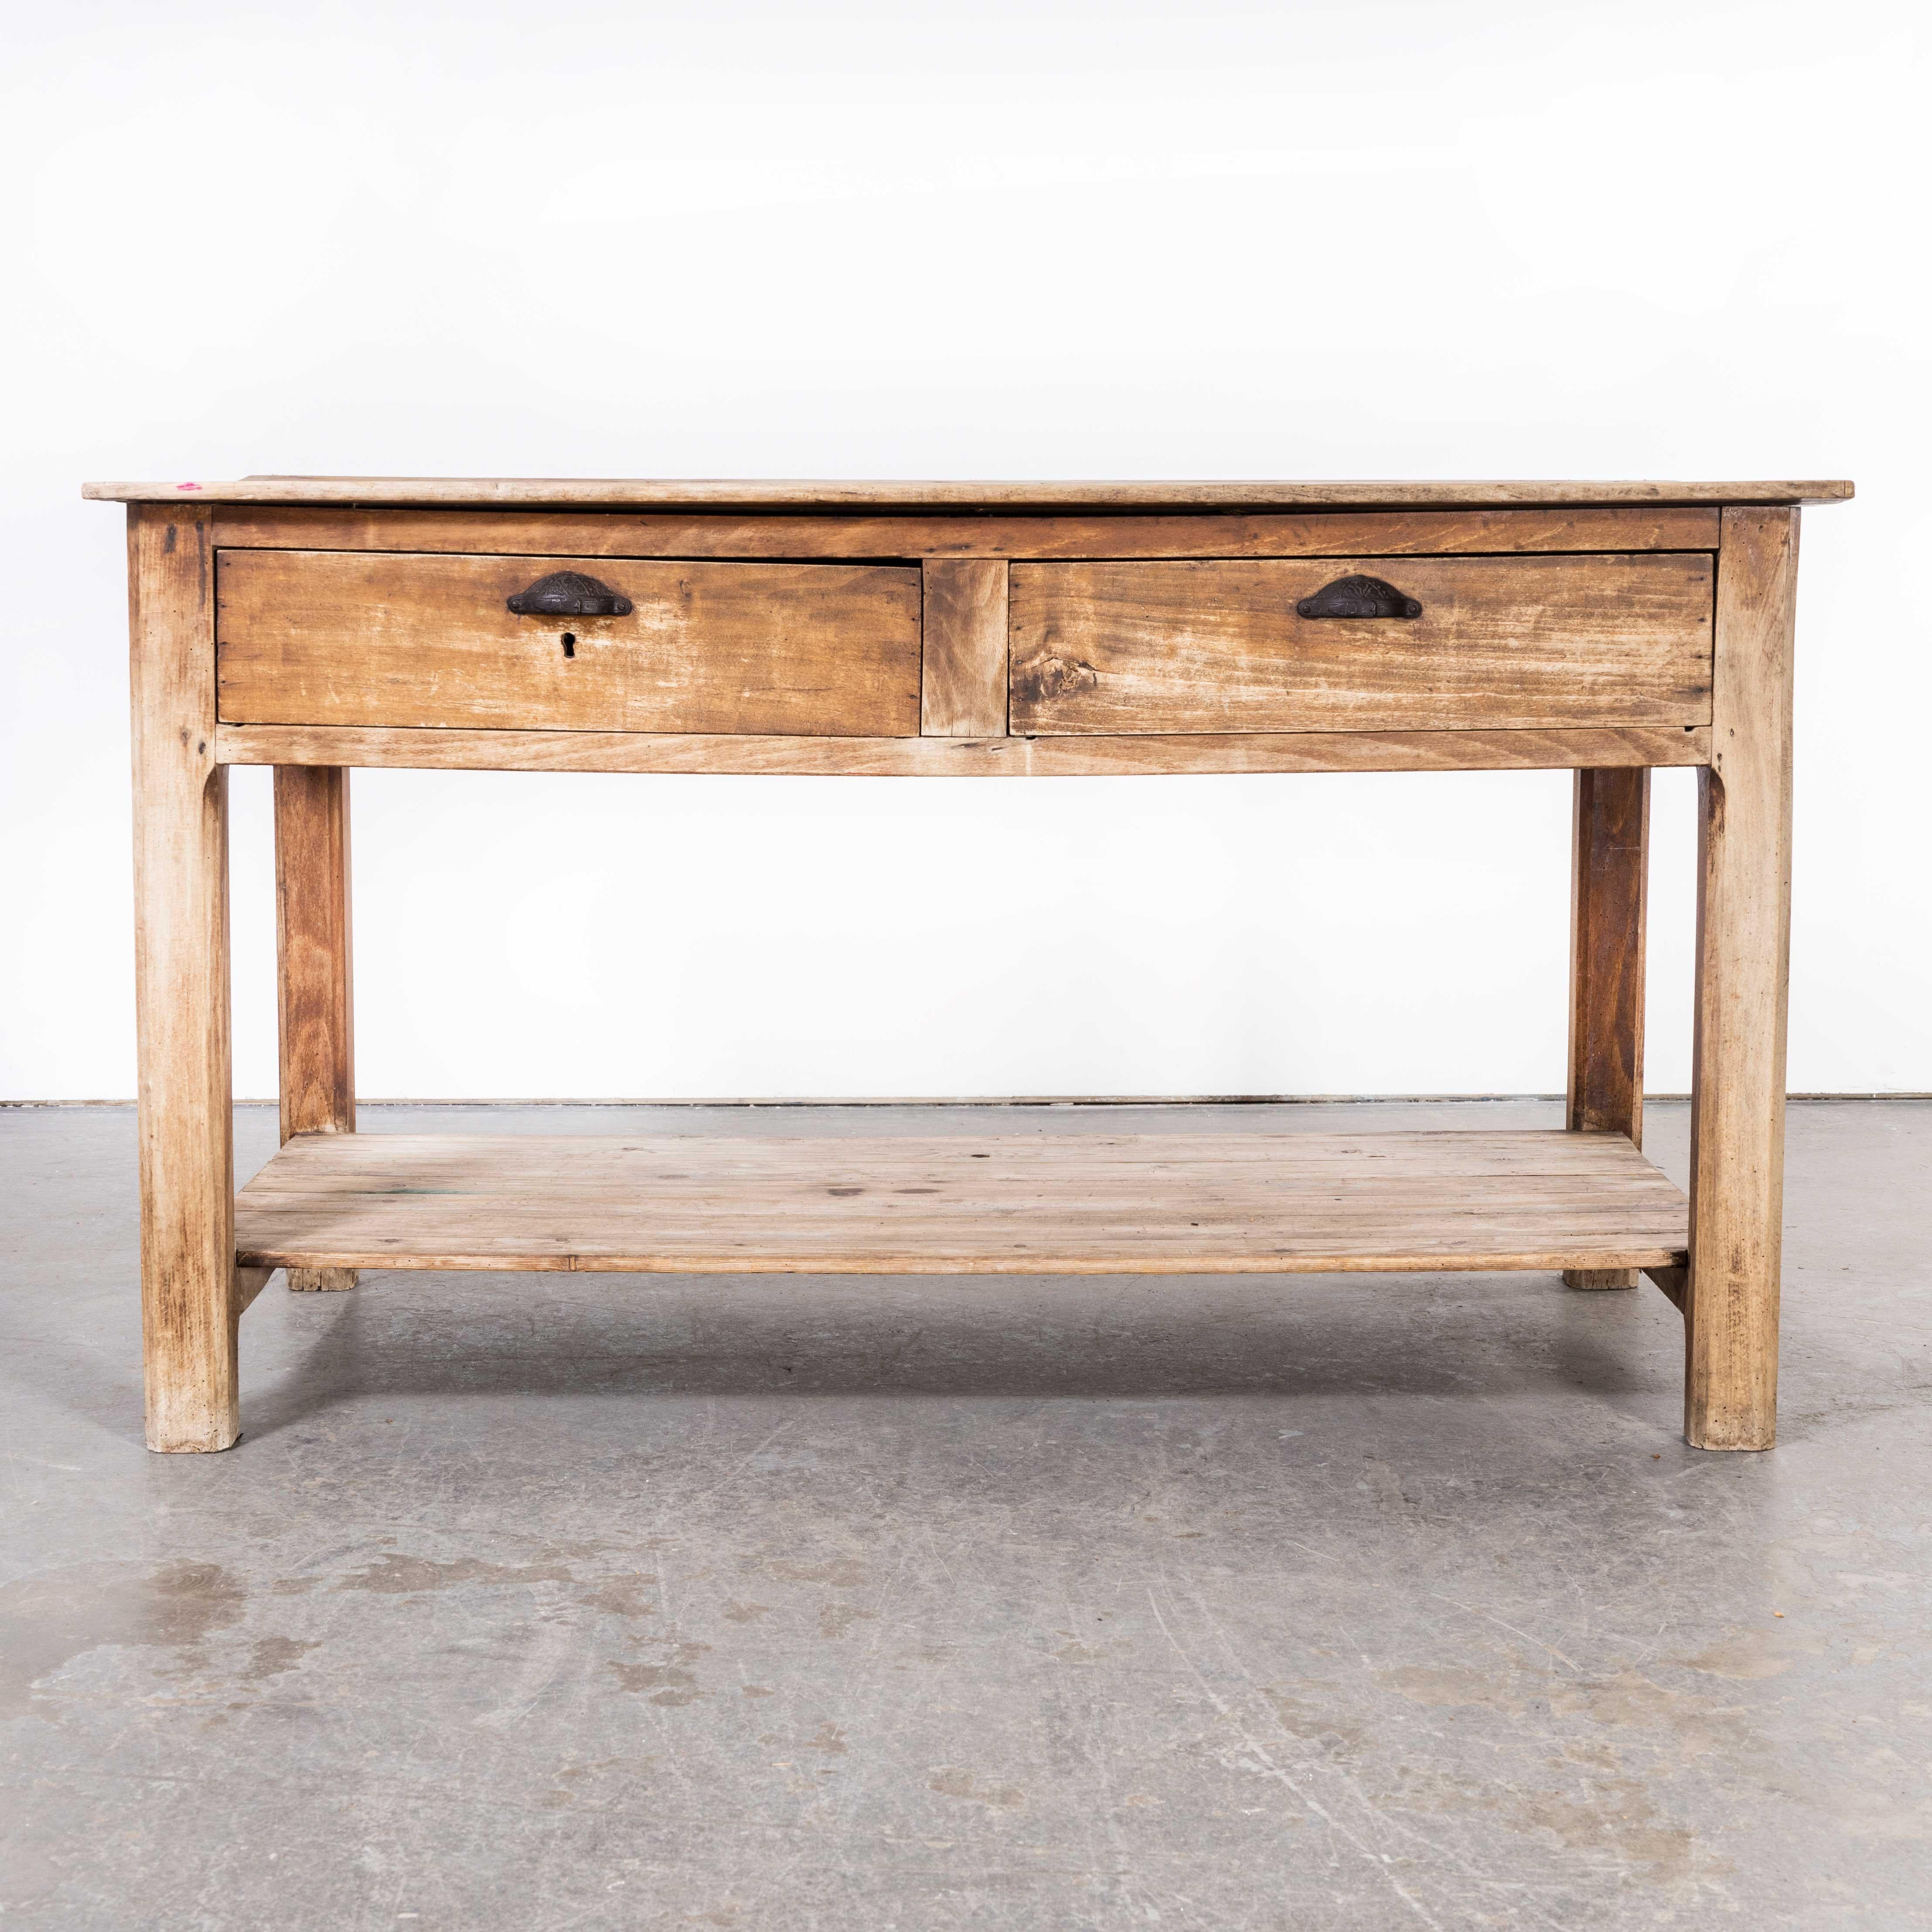 1950’s Scubbed Pine French Console Table
1950’s Scrubbed Pine French Console Table. Superb practical French console table with two large drawers. The table is made from pitch pine and features two good size drawers (66L x 56W x 13D) with the